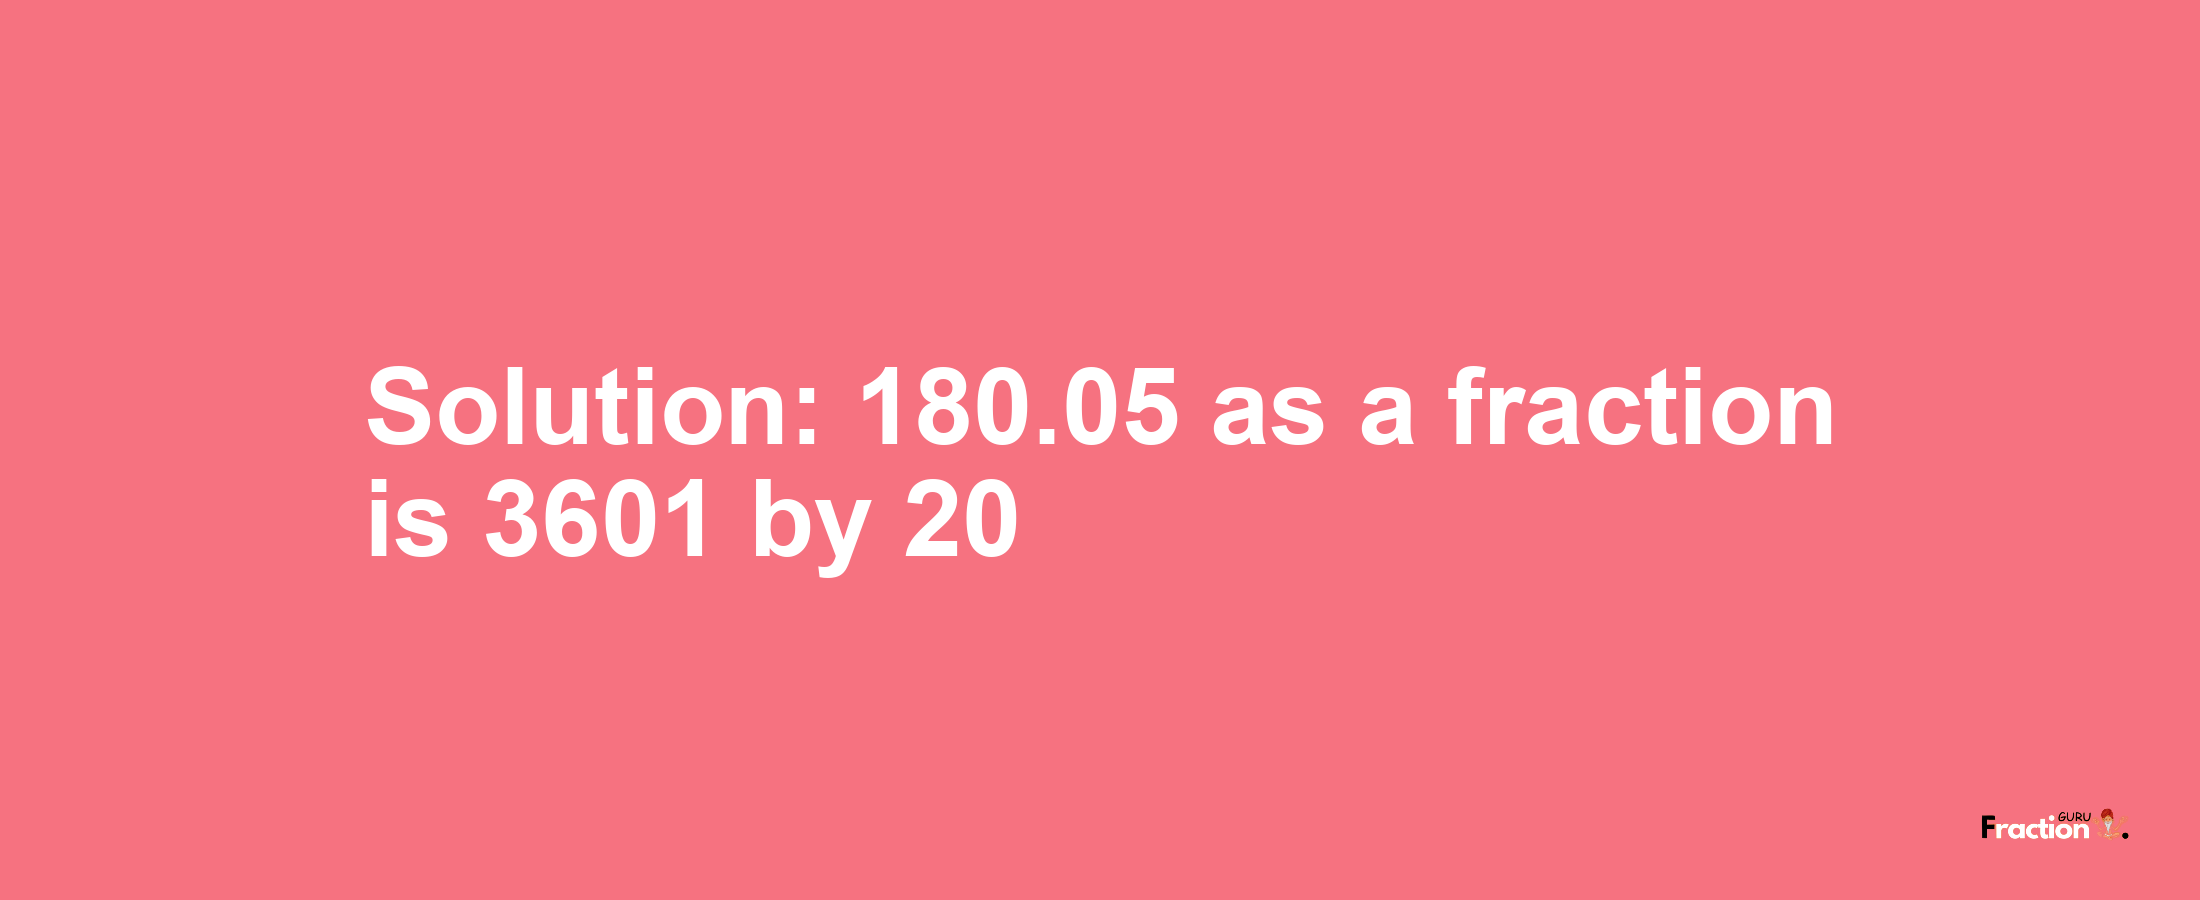 Solution:180.05 as a fraction is 3601/20